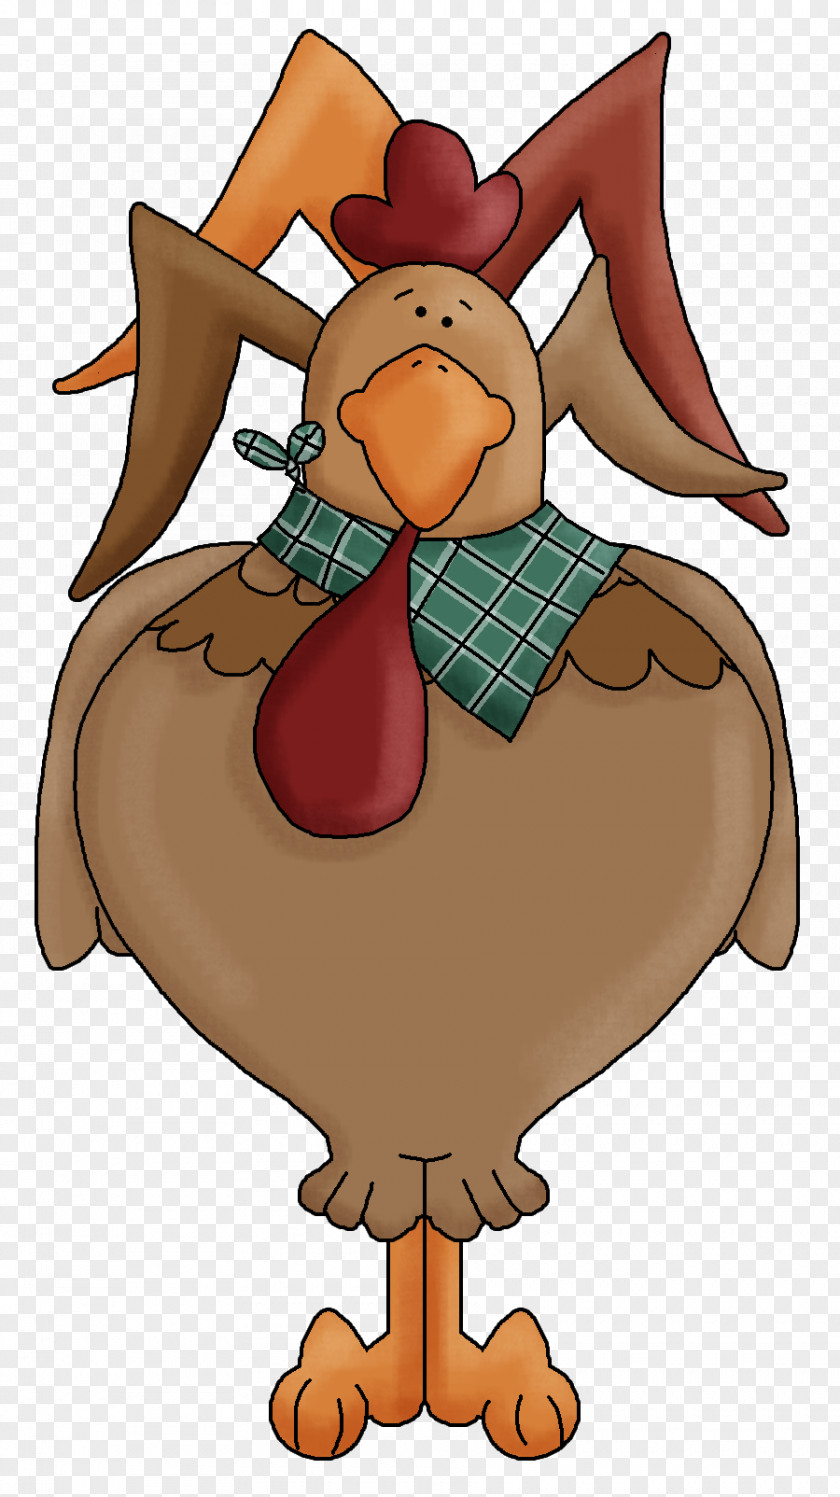 Rooster Rubber Chicken Apron Galliformes PNG